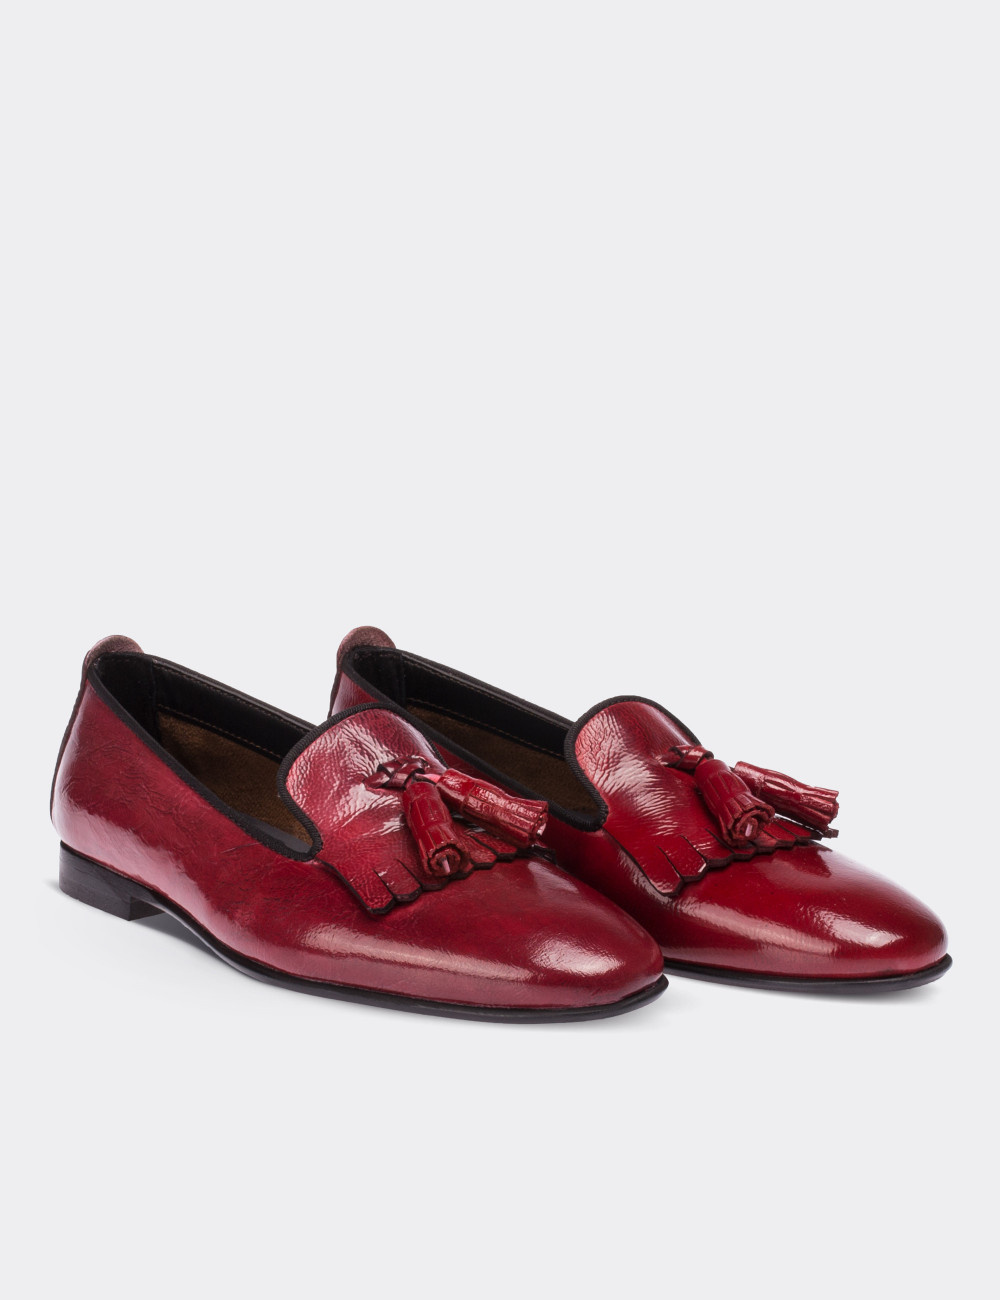 Burgundy Patent Leather Loafers - 01612ZBRDM01